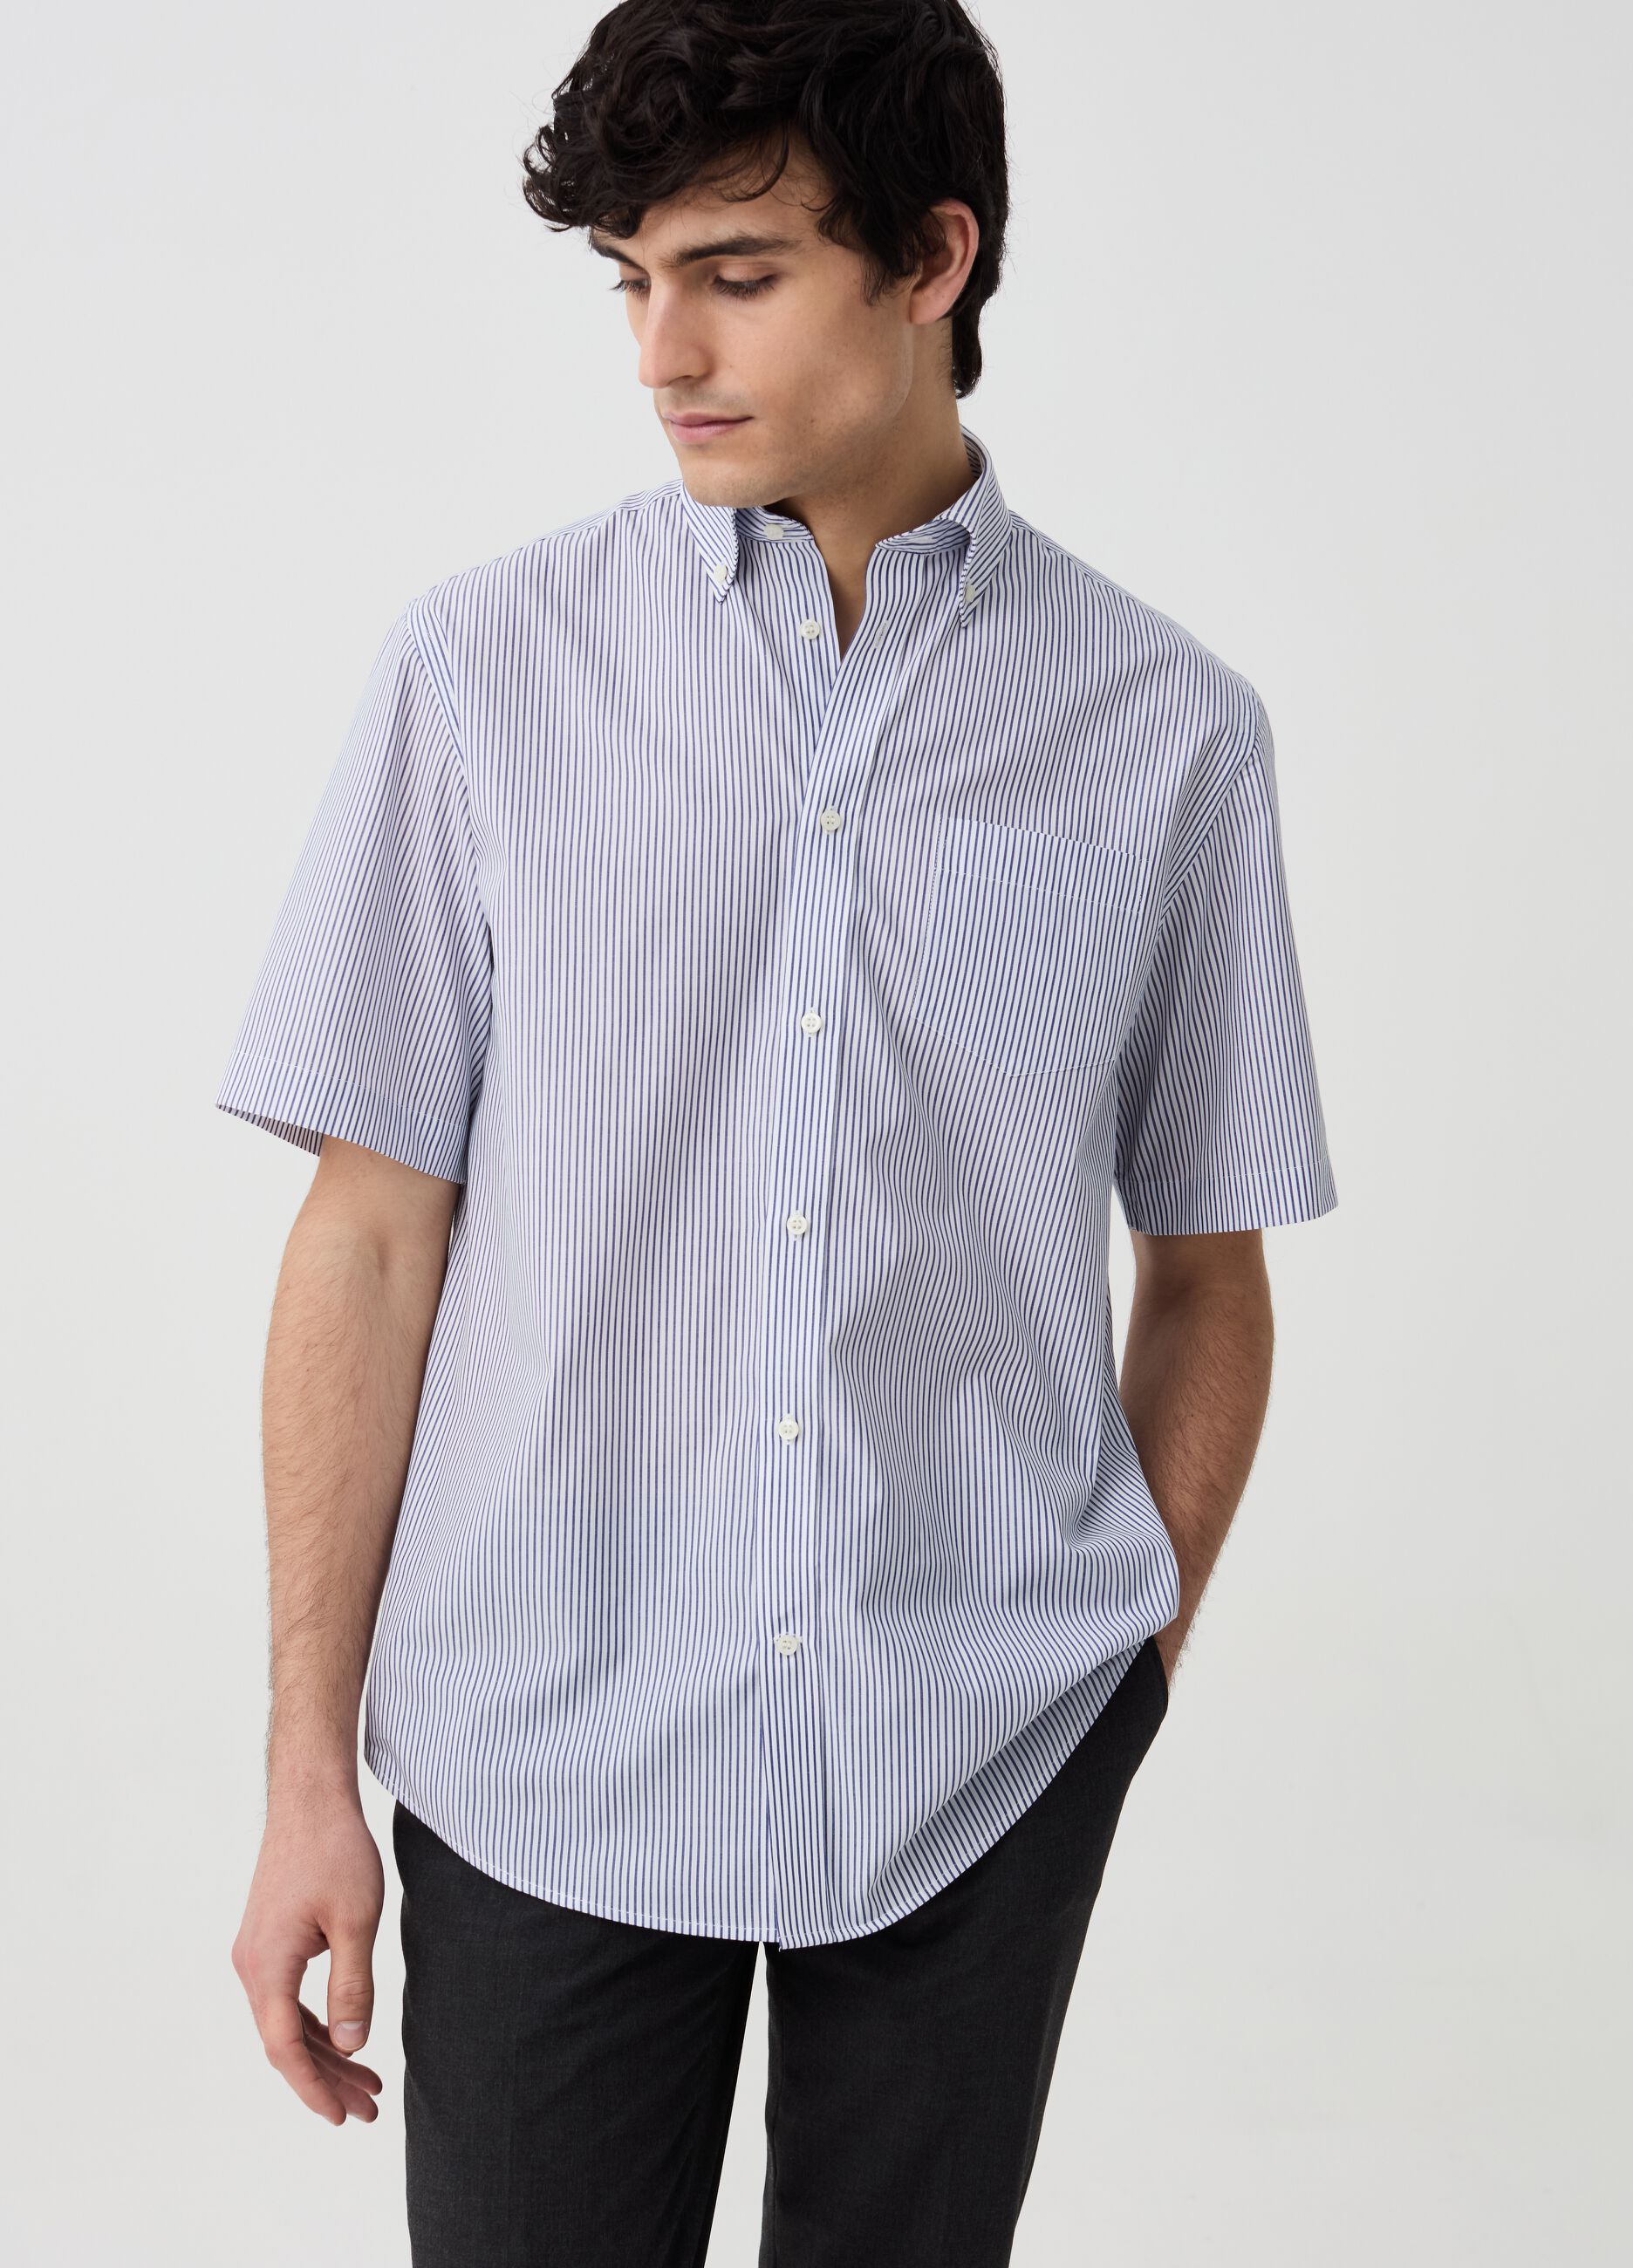 Short-sleeved shirt with thin stripes pattern